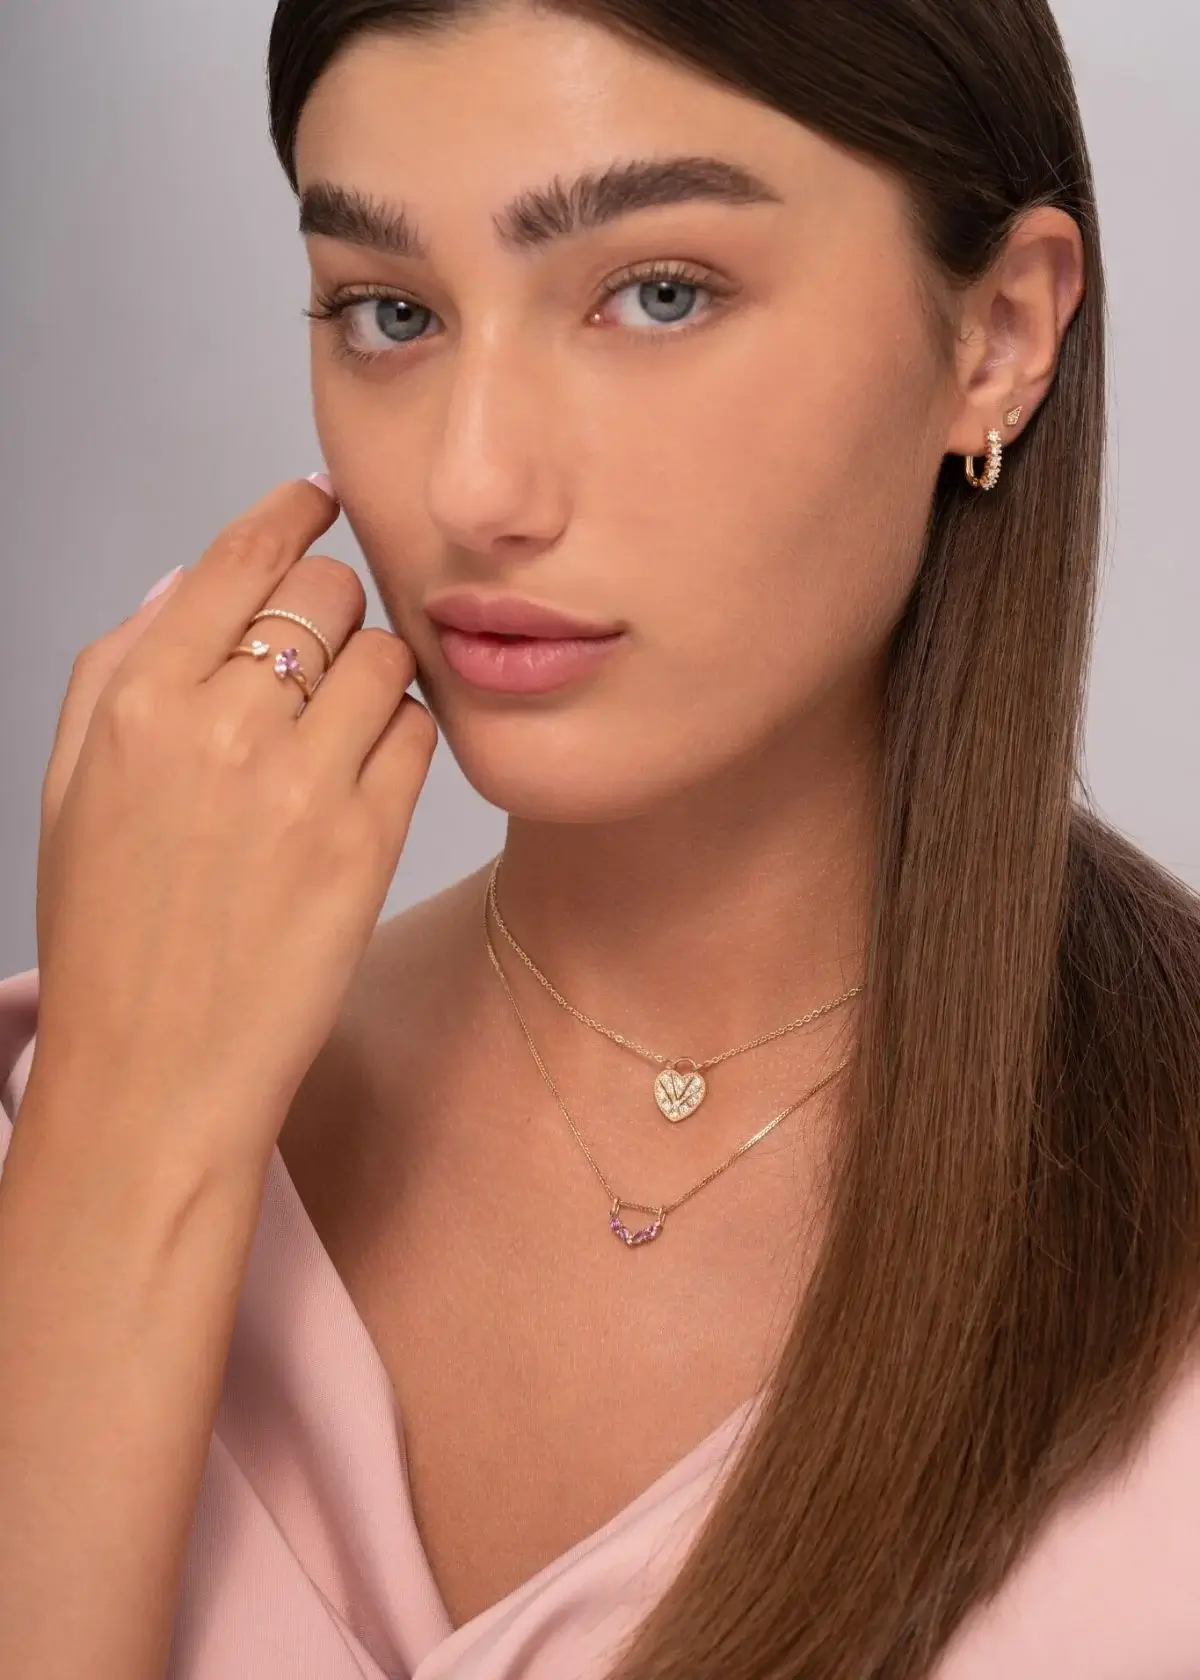 How to choose the right diamond tennis necklace?